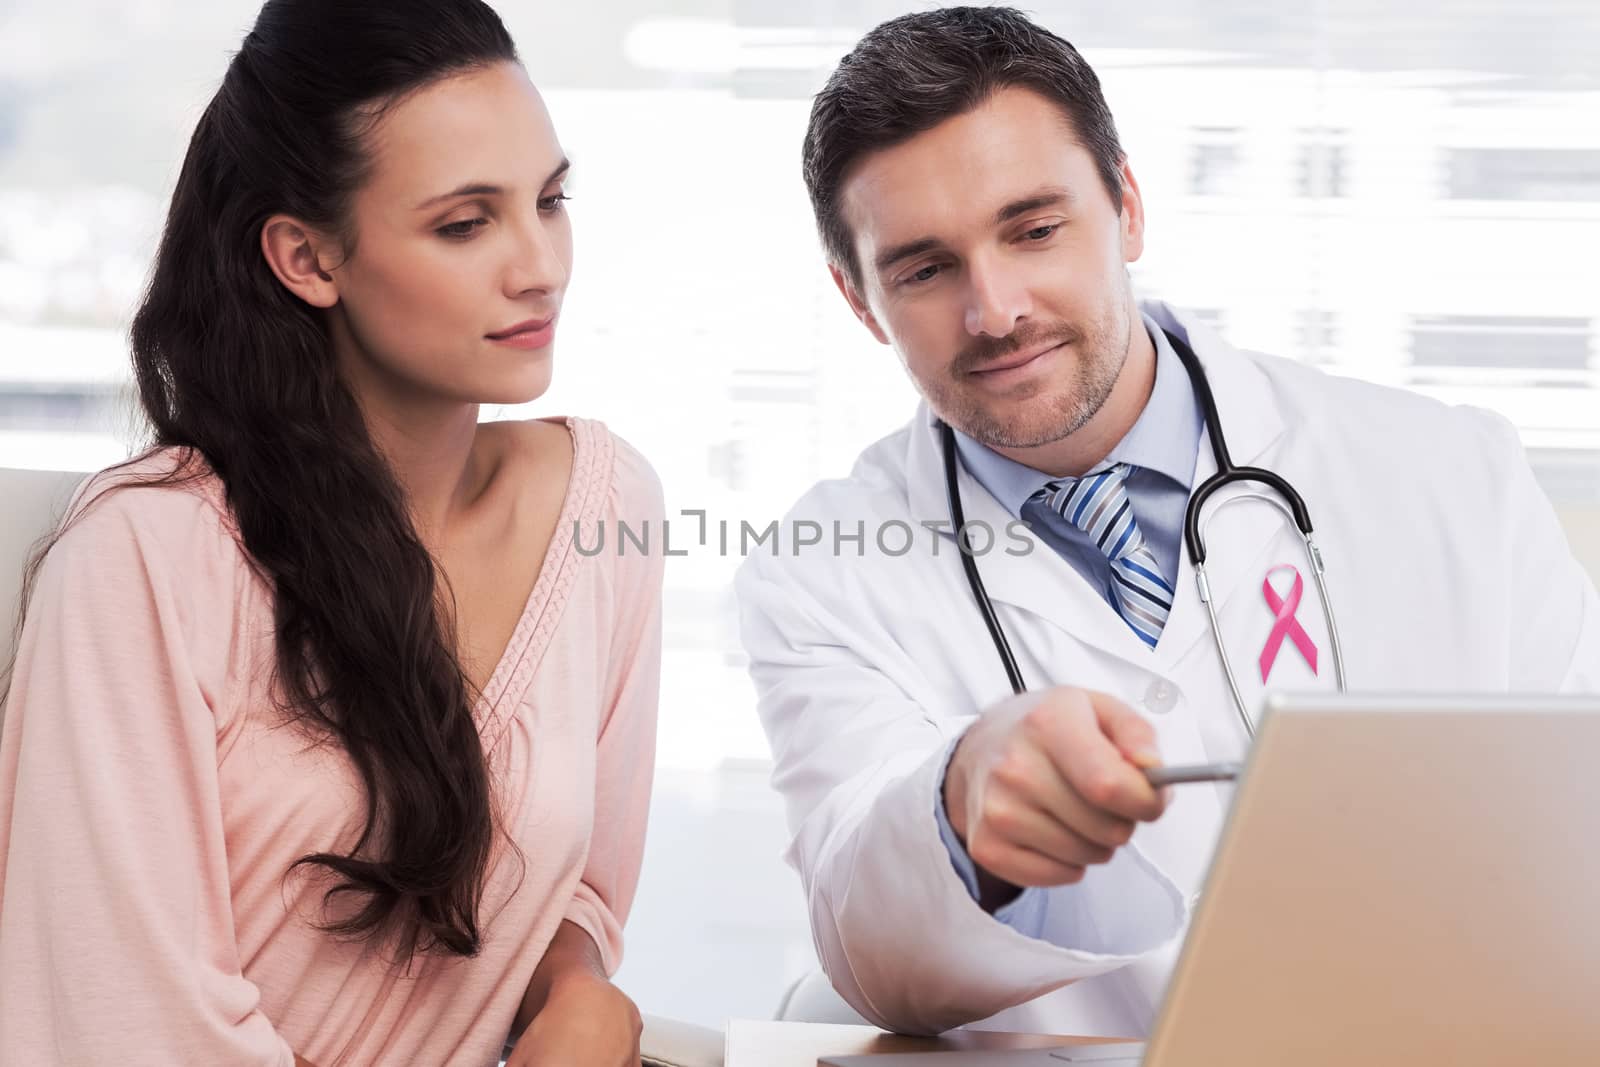 Pink awareness ribbon against male doctor showing something on laptop to patient